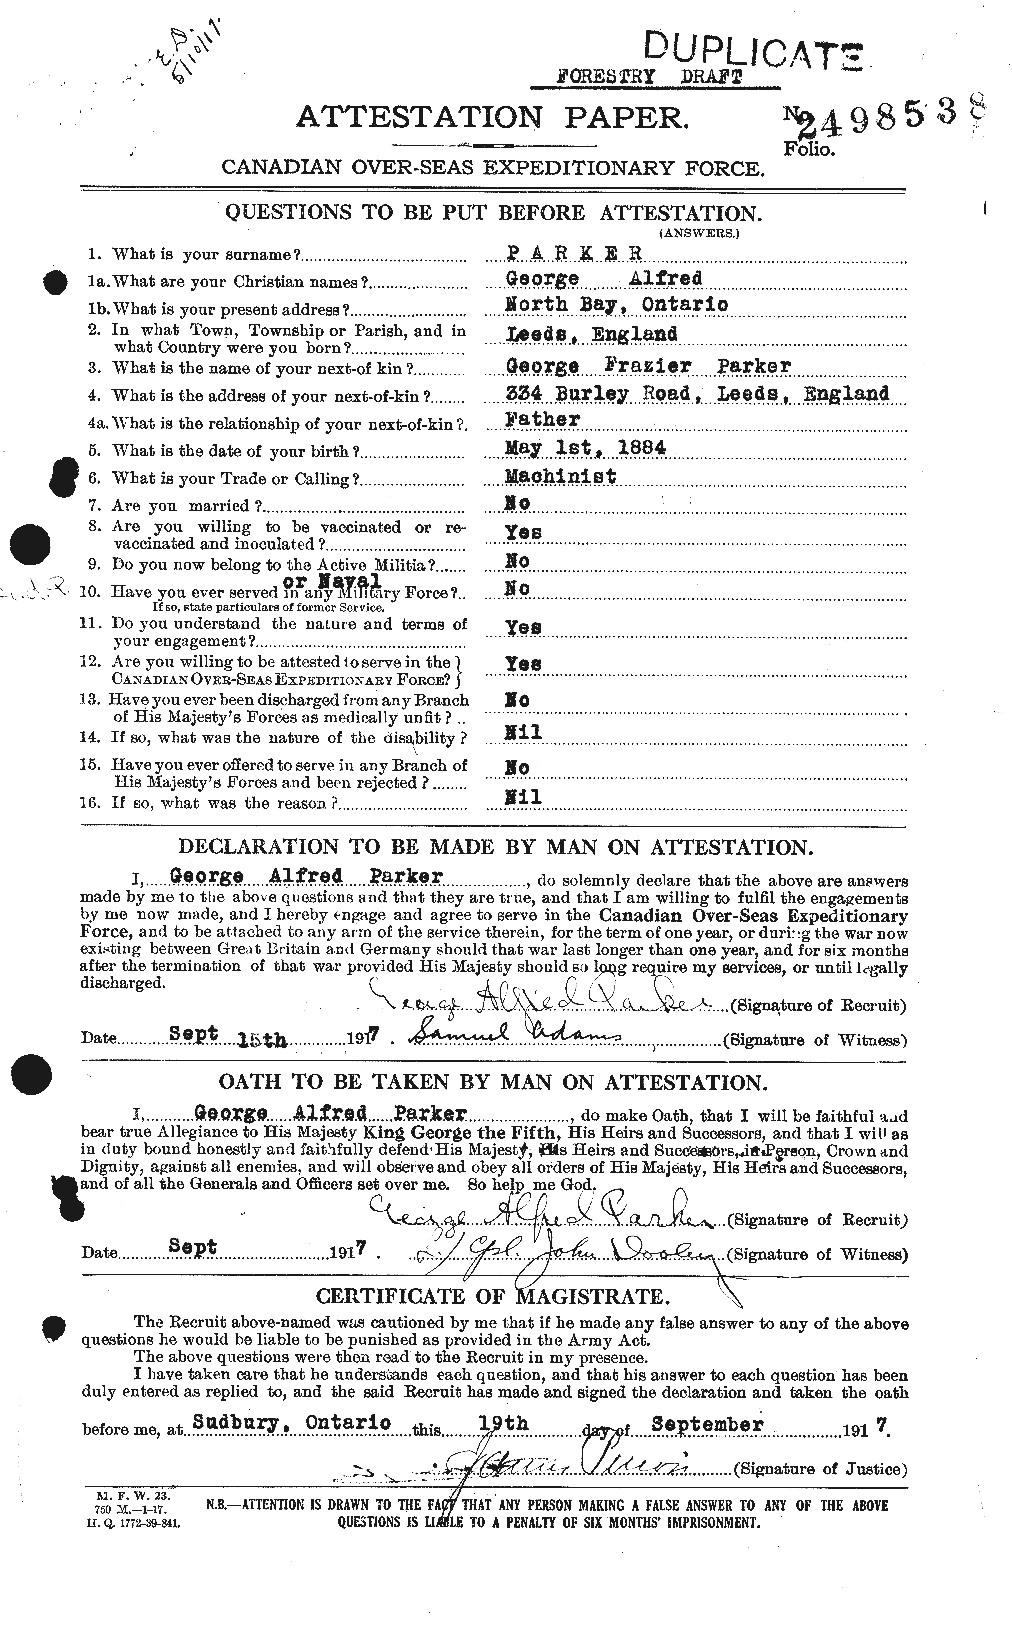 Personnel Records of the First World War - CEF 565254a